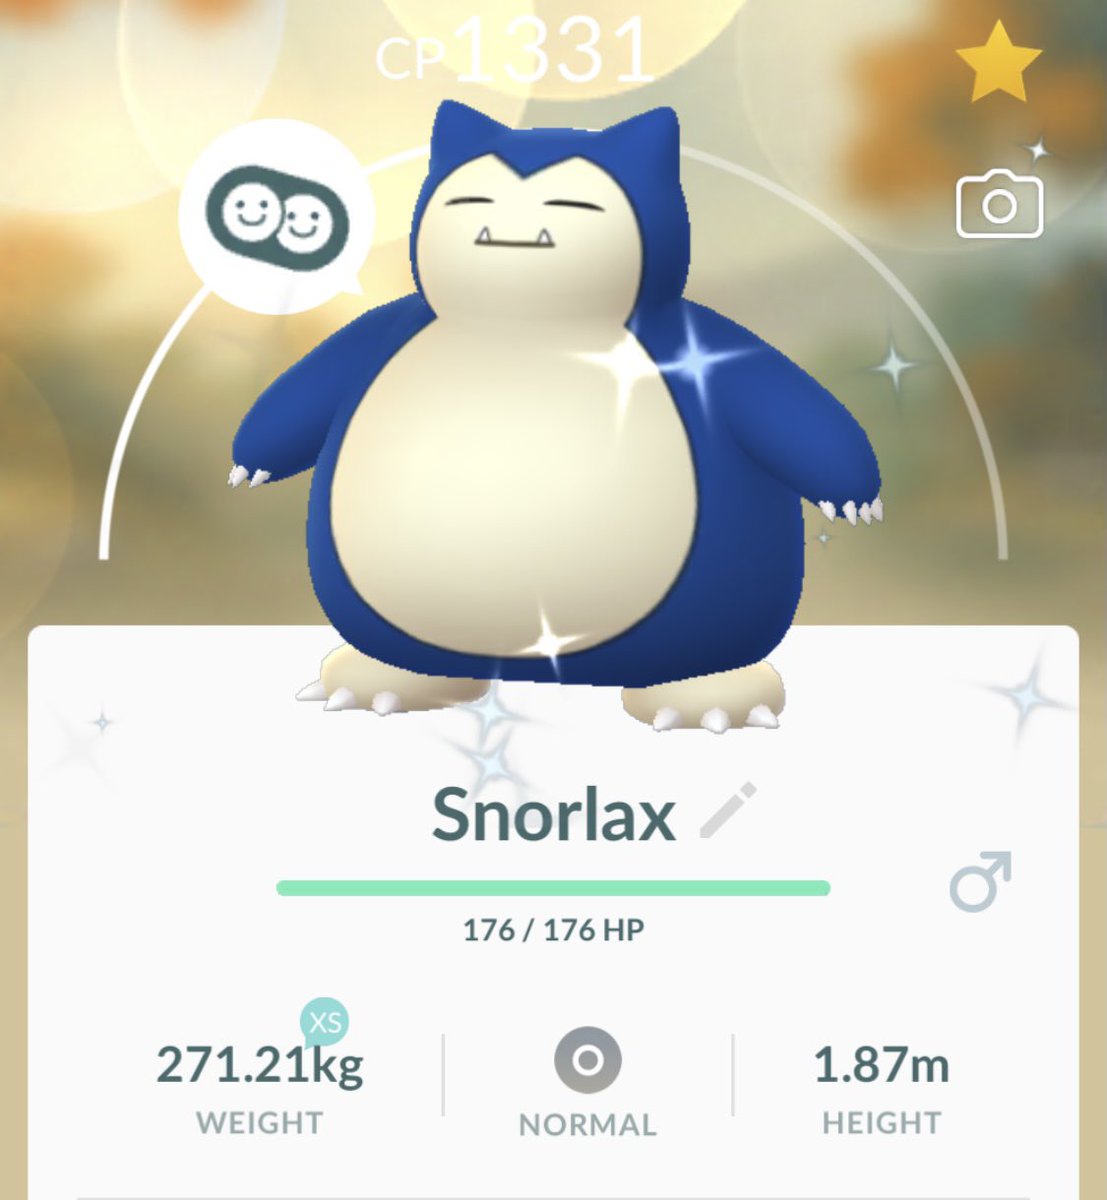 Uzivatel Mrae Play Na Twitteru Shinies That My Family Caught That I Wish I Did Very Envious Of The Shiny Snorlax Which Was From The Shiny Ditto Special Research Pretty Shocked To